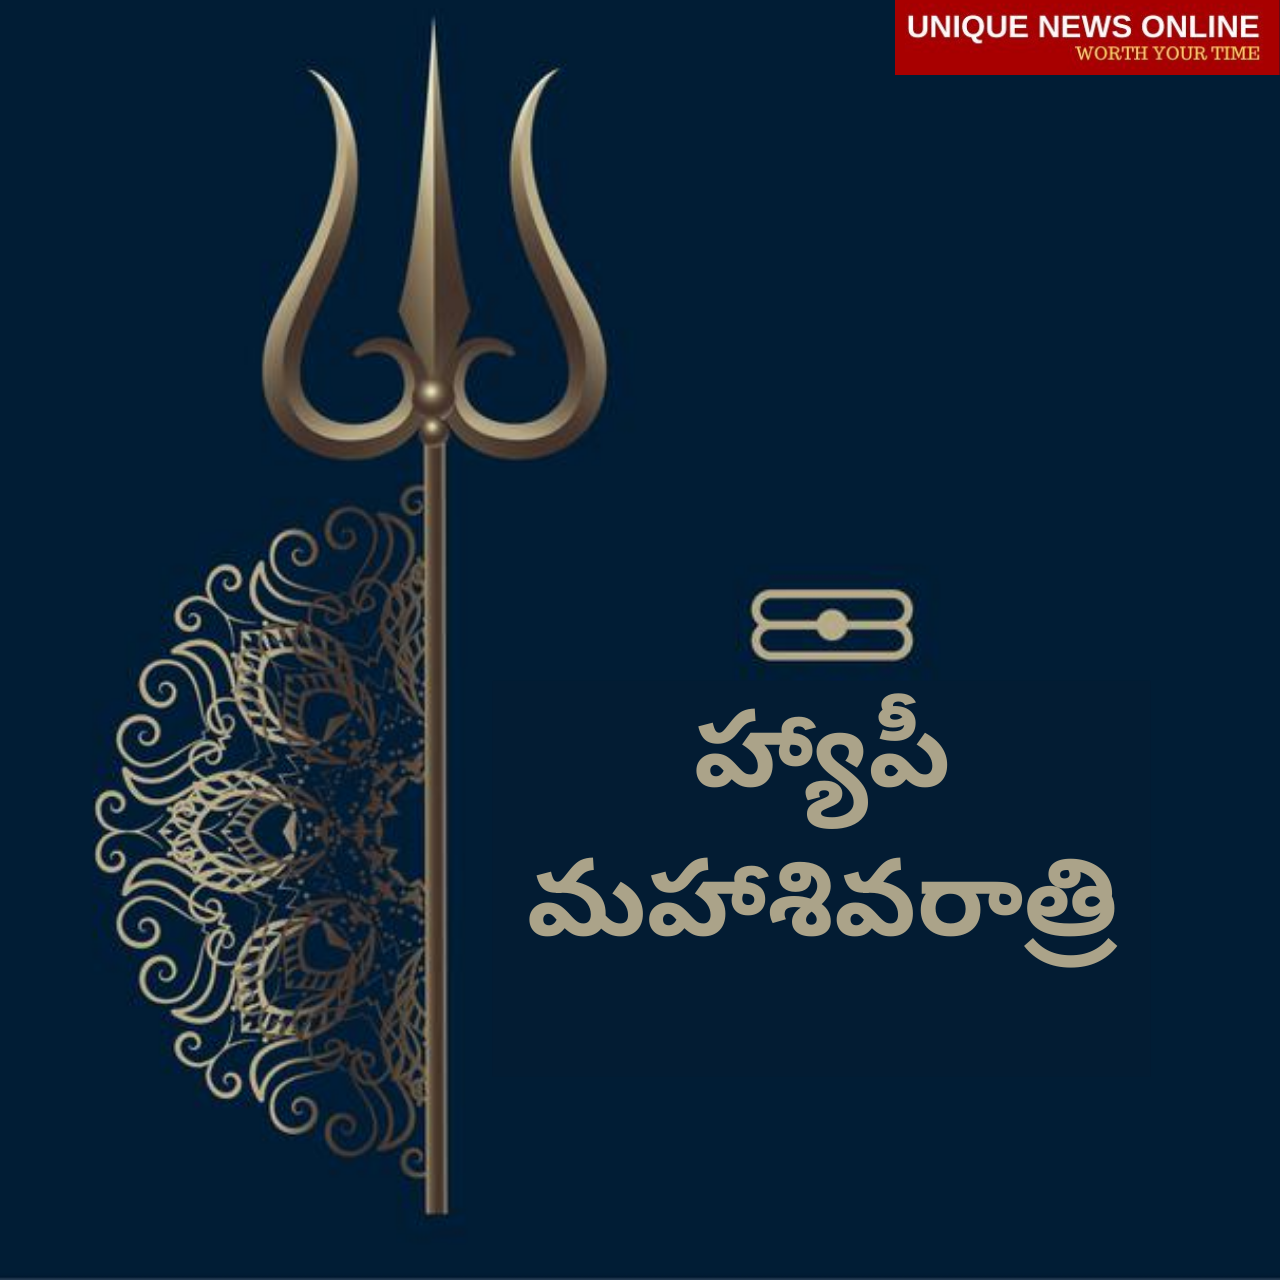 Maha Shivratri 2021 Wishes in Telugu Quotes, Messages, Greetings, and HD Images to Share